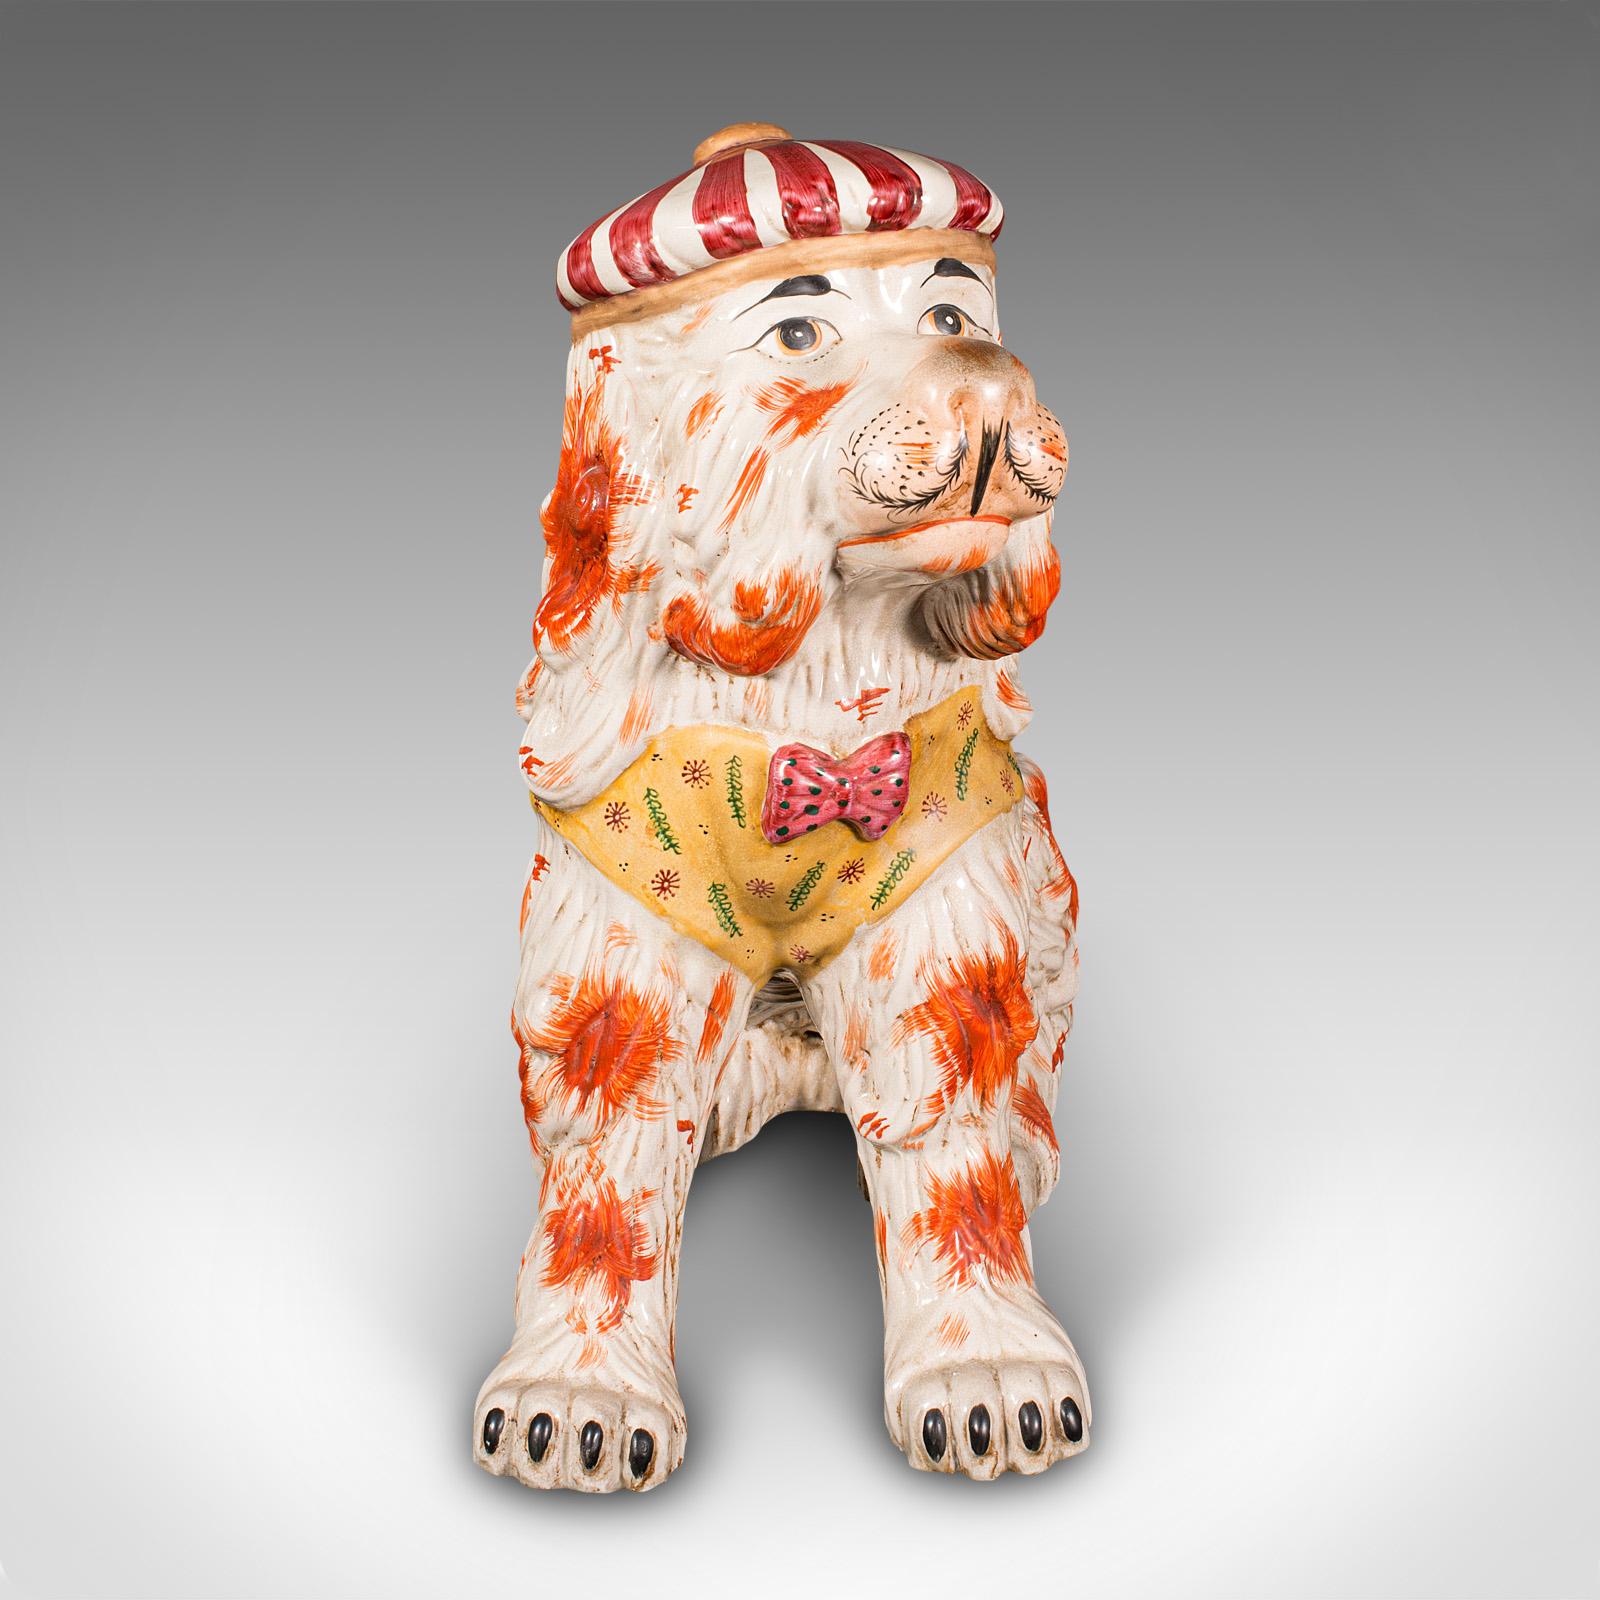 This is a very large antique decorative dog. An English, ceramic figure in life-size proportion, dating to the late Victorian period, circa 1900.

Of extraordinary scale and a wonderfully unusual example of the traditional Staffordshire